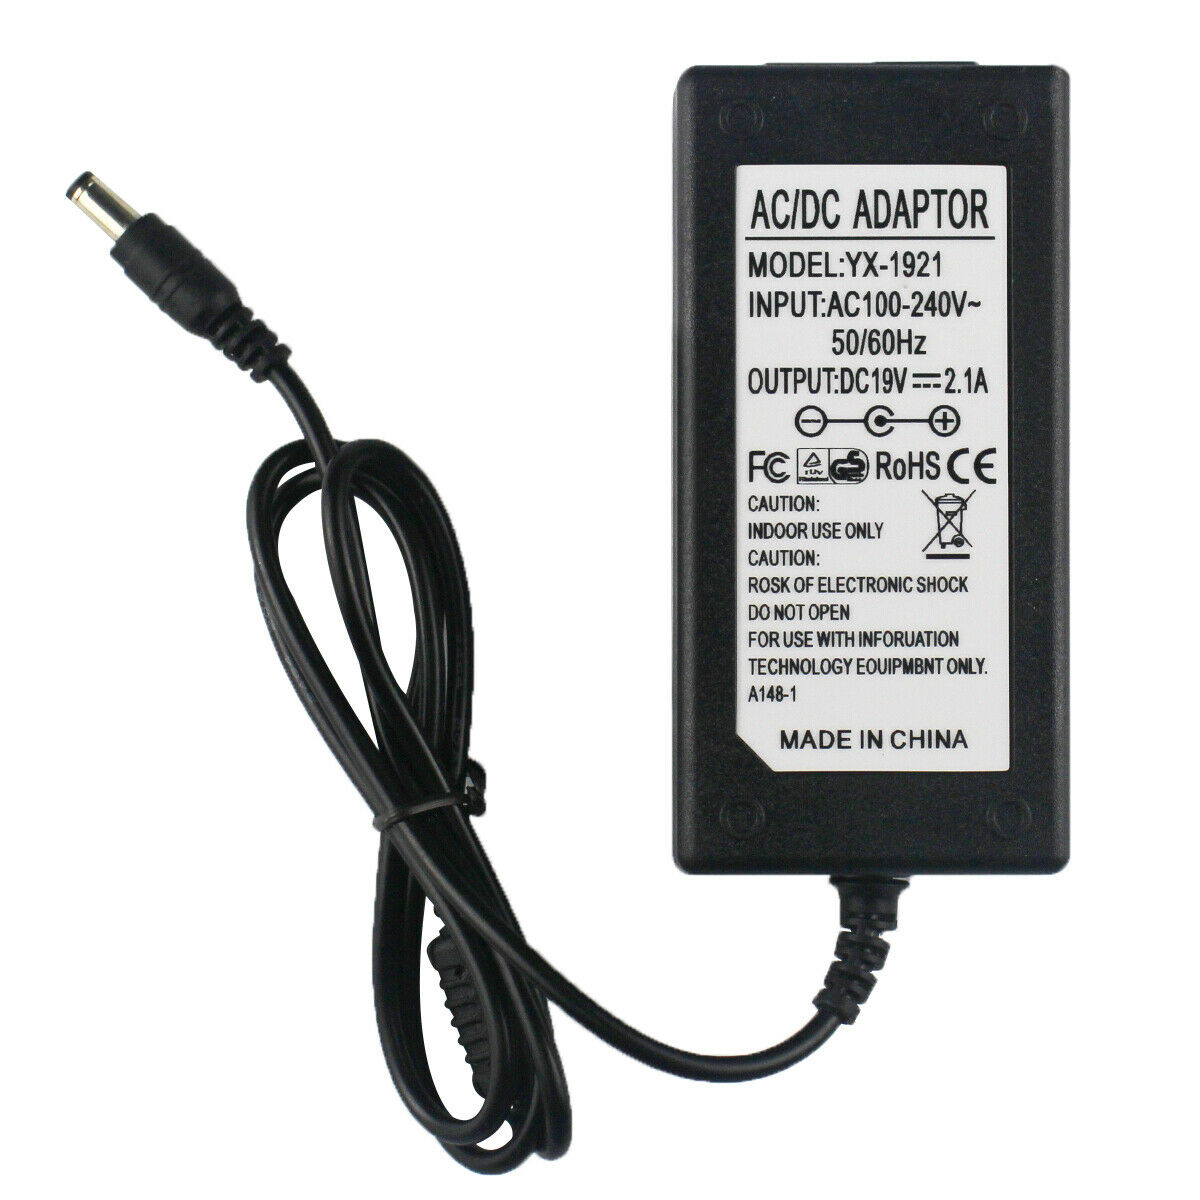 AC/DC Adapter For Harman Kardon ONYX Studio Wireless Speaker System 6132A-ONYXST Brand: Unbranded Type: Adapter Outp